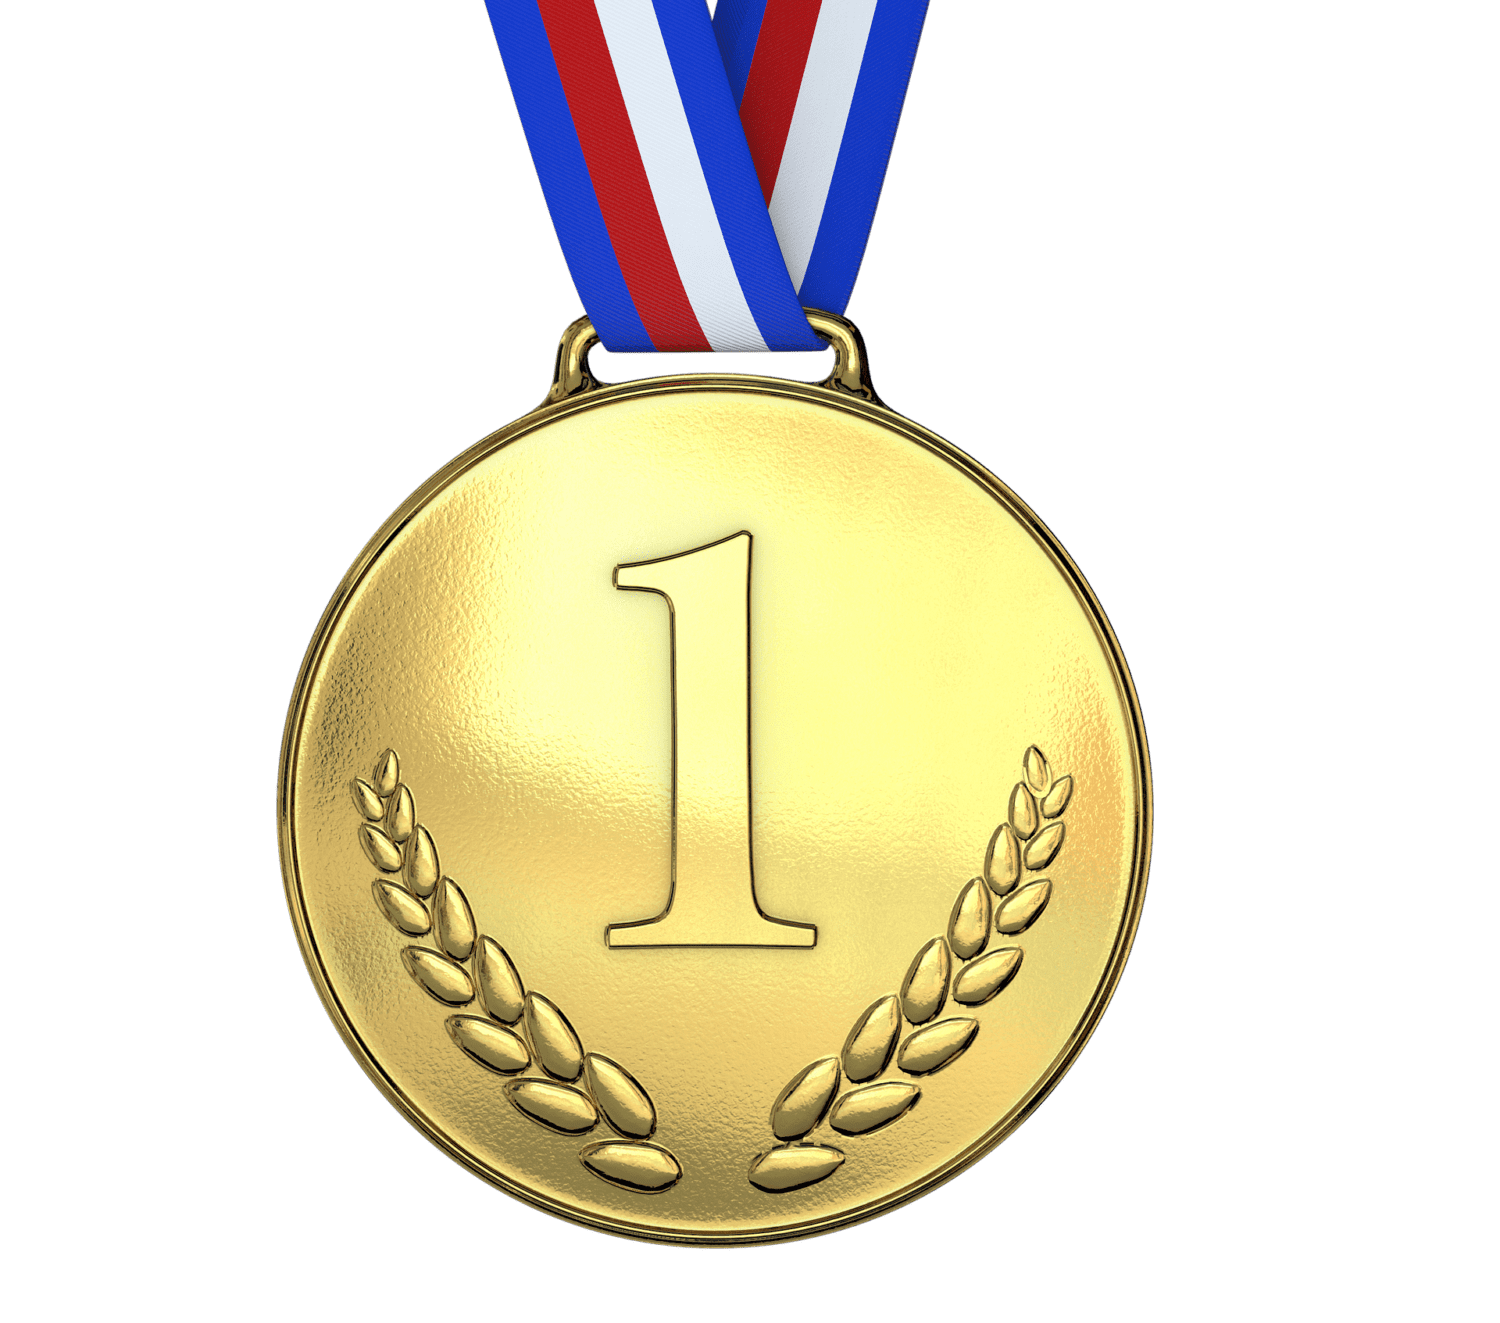 Illustration of a gold medal with the number one on it